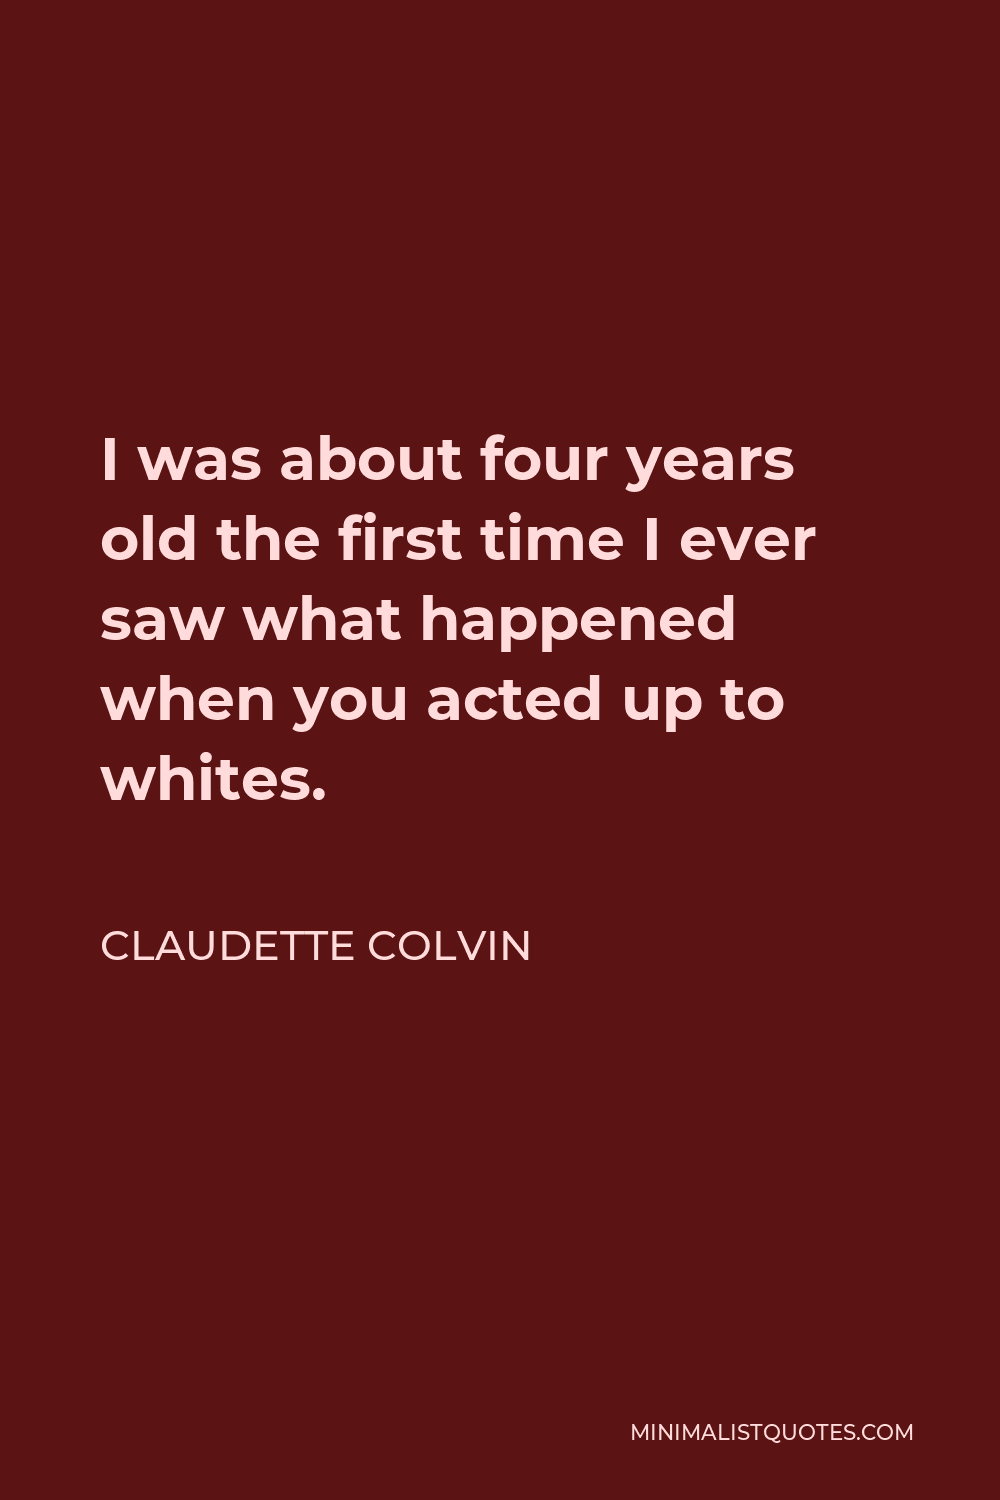 Claudette Colvin Quote - I was about four years old the first time I ever saw what happened when you acted up to whites.